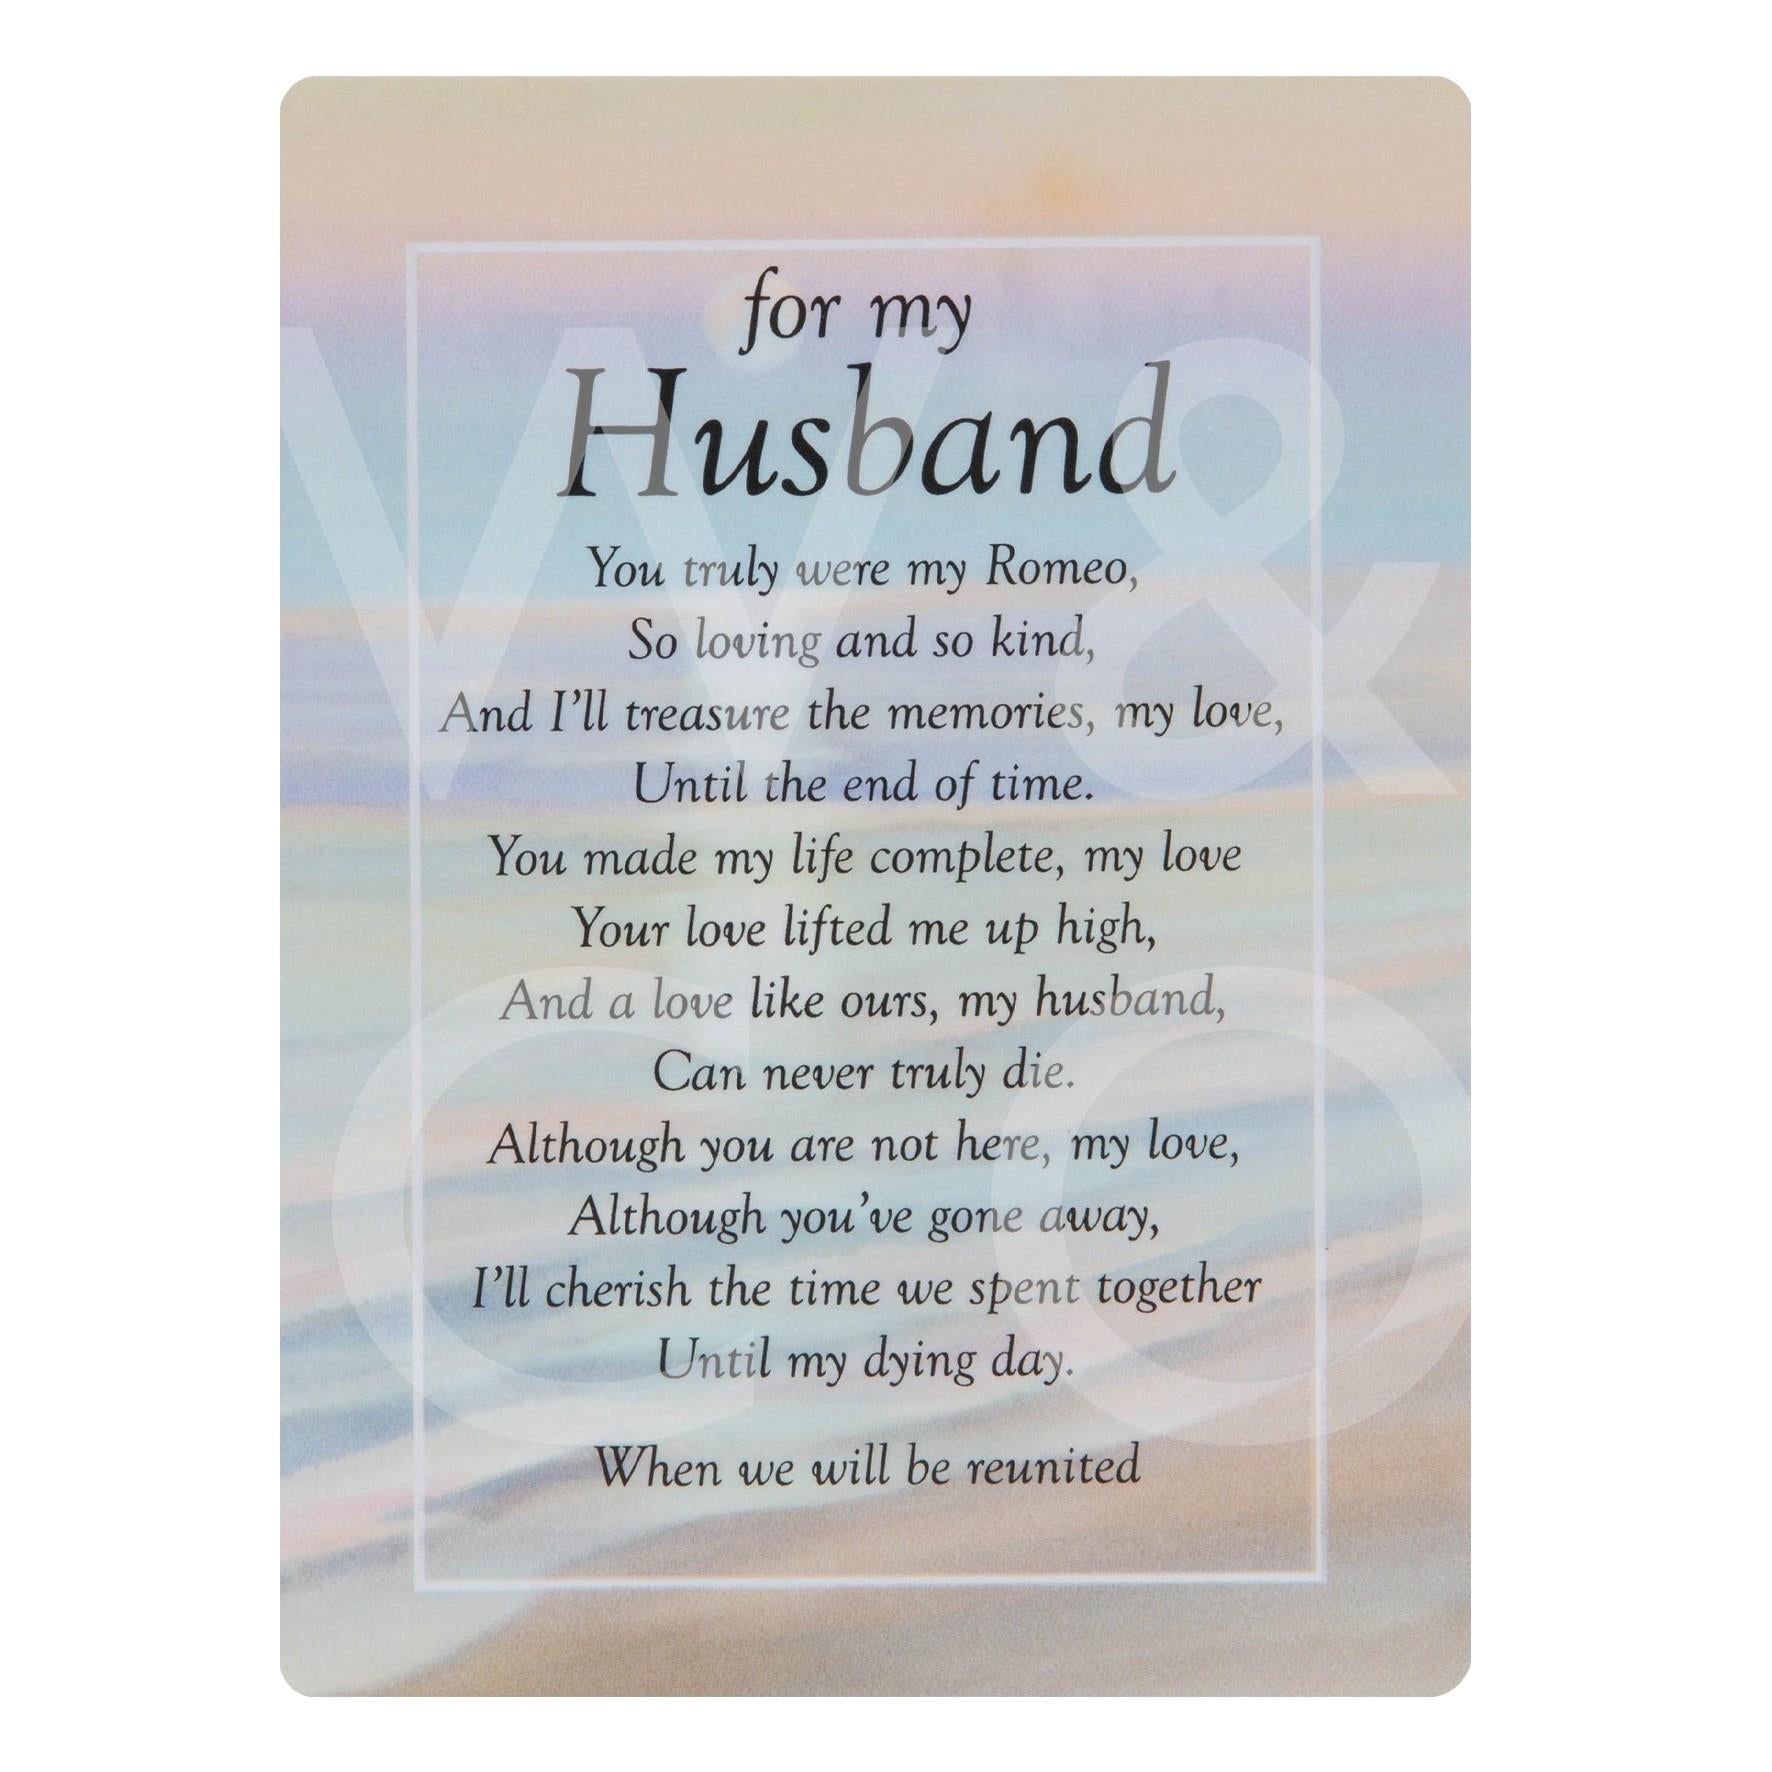 to my husband in heaven poem